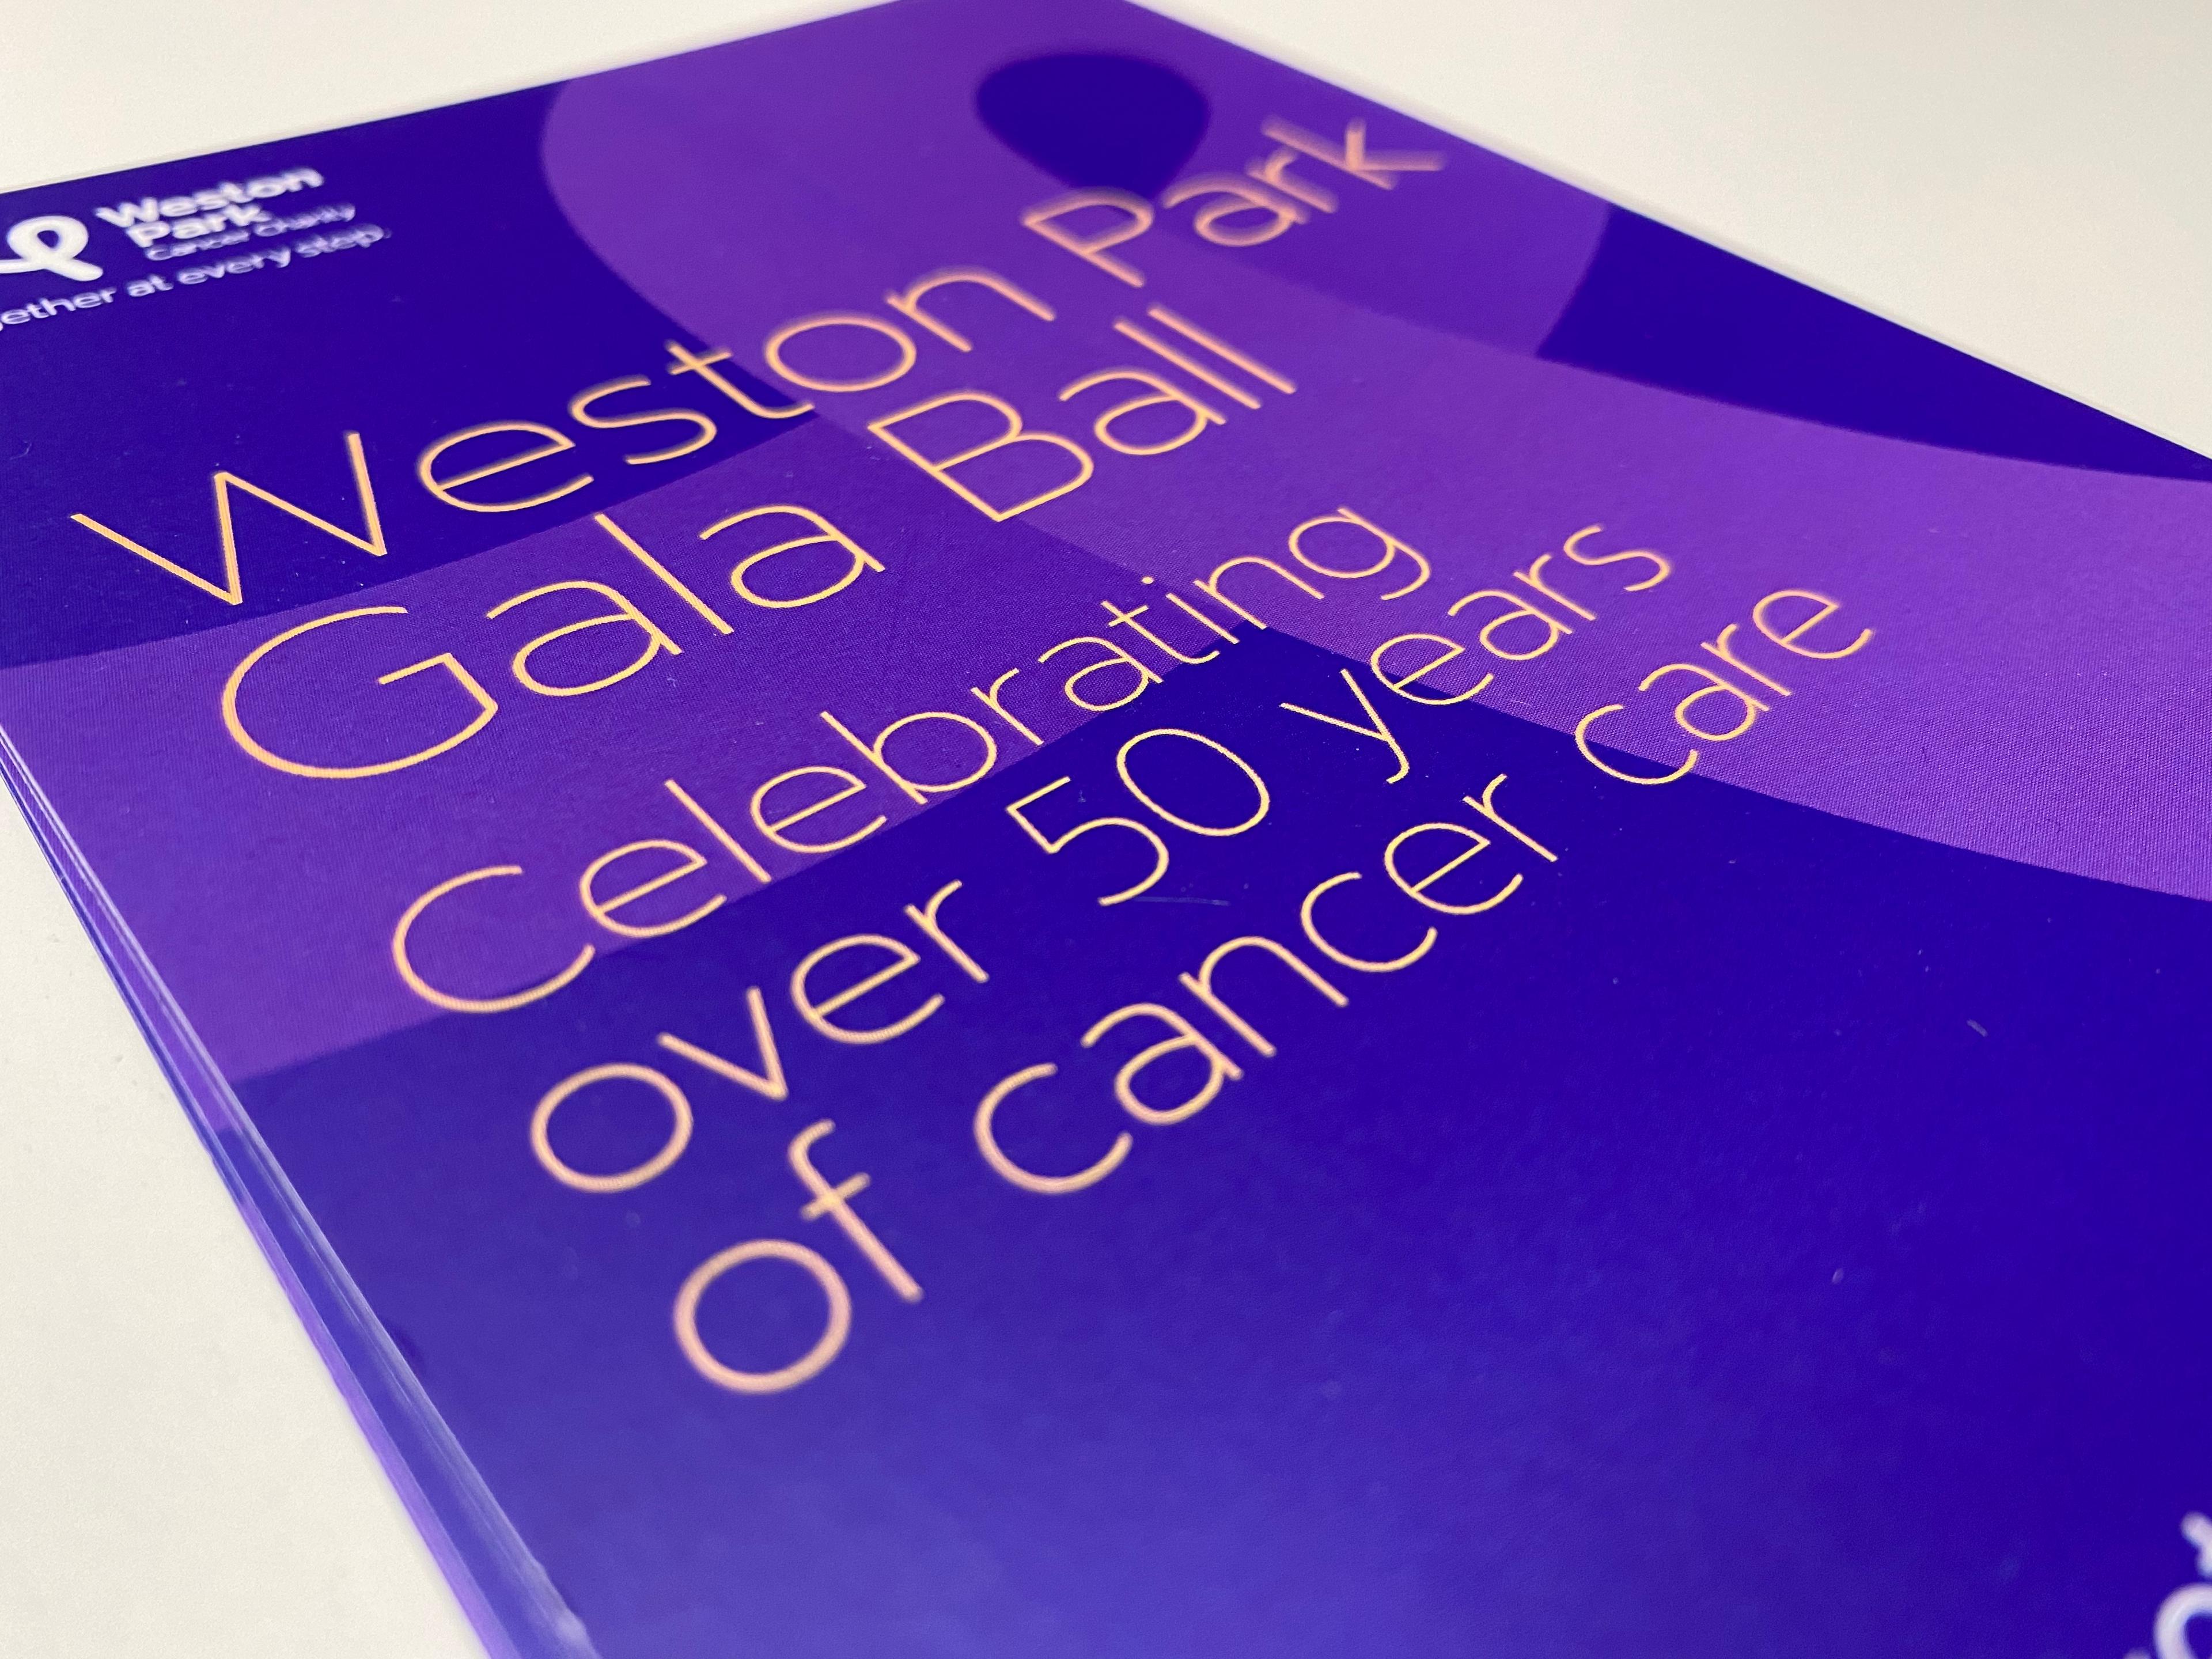 A purple flyer which features gold writing and Weston Park Cancer Charity's logo. The flyer advertises the Weston Park Gala Ball, which celebrated 50 years of Weston Park Cancer Centre.